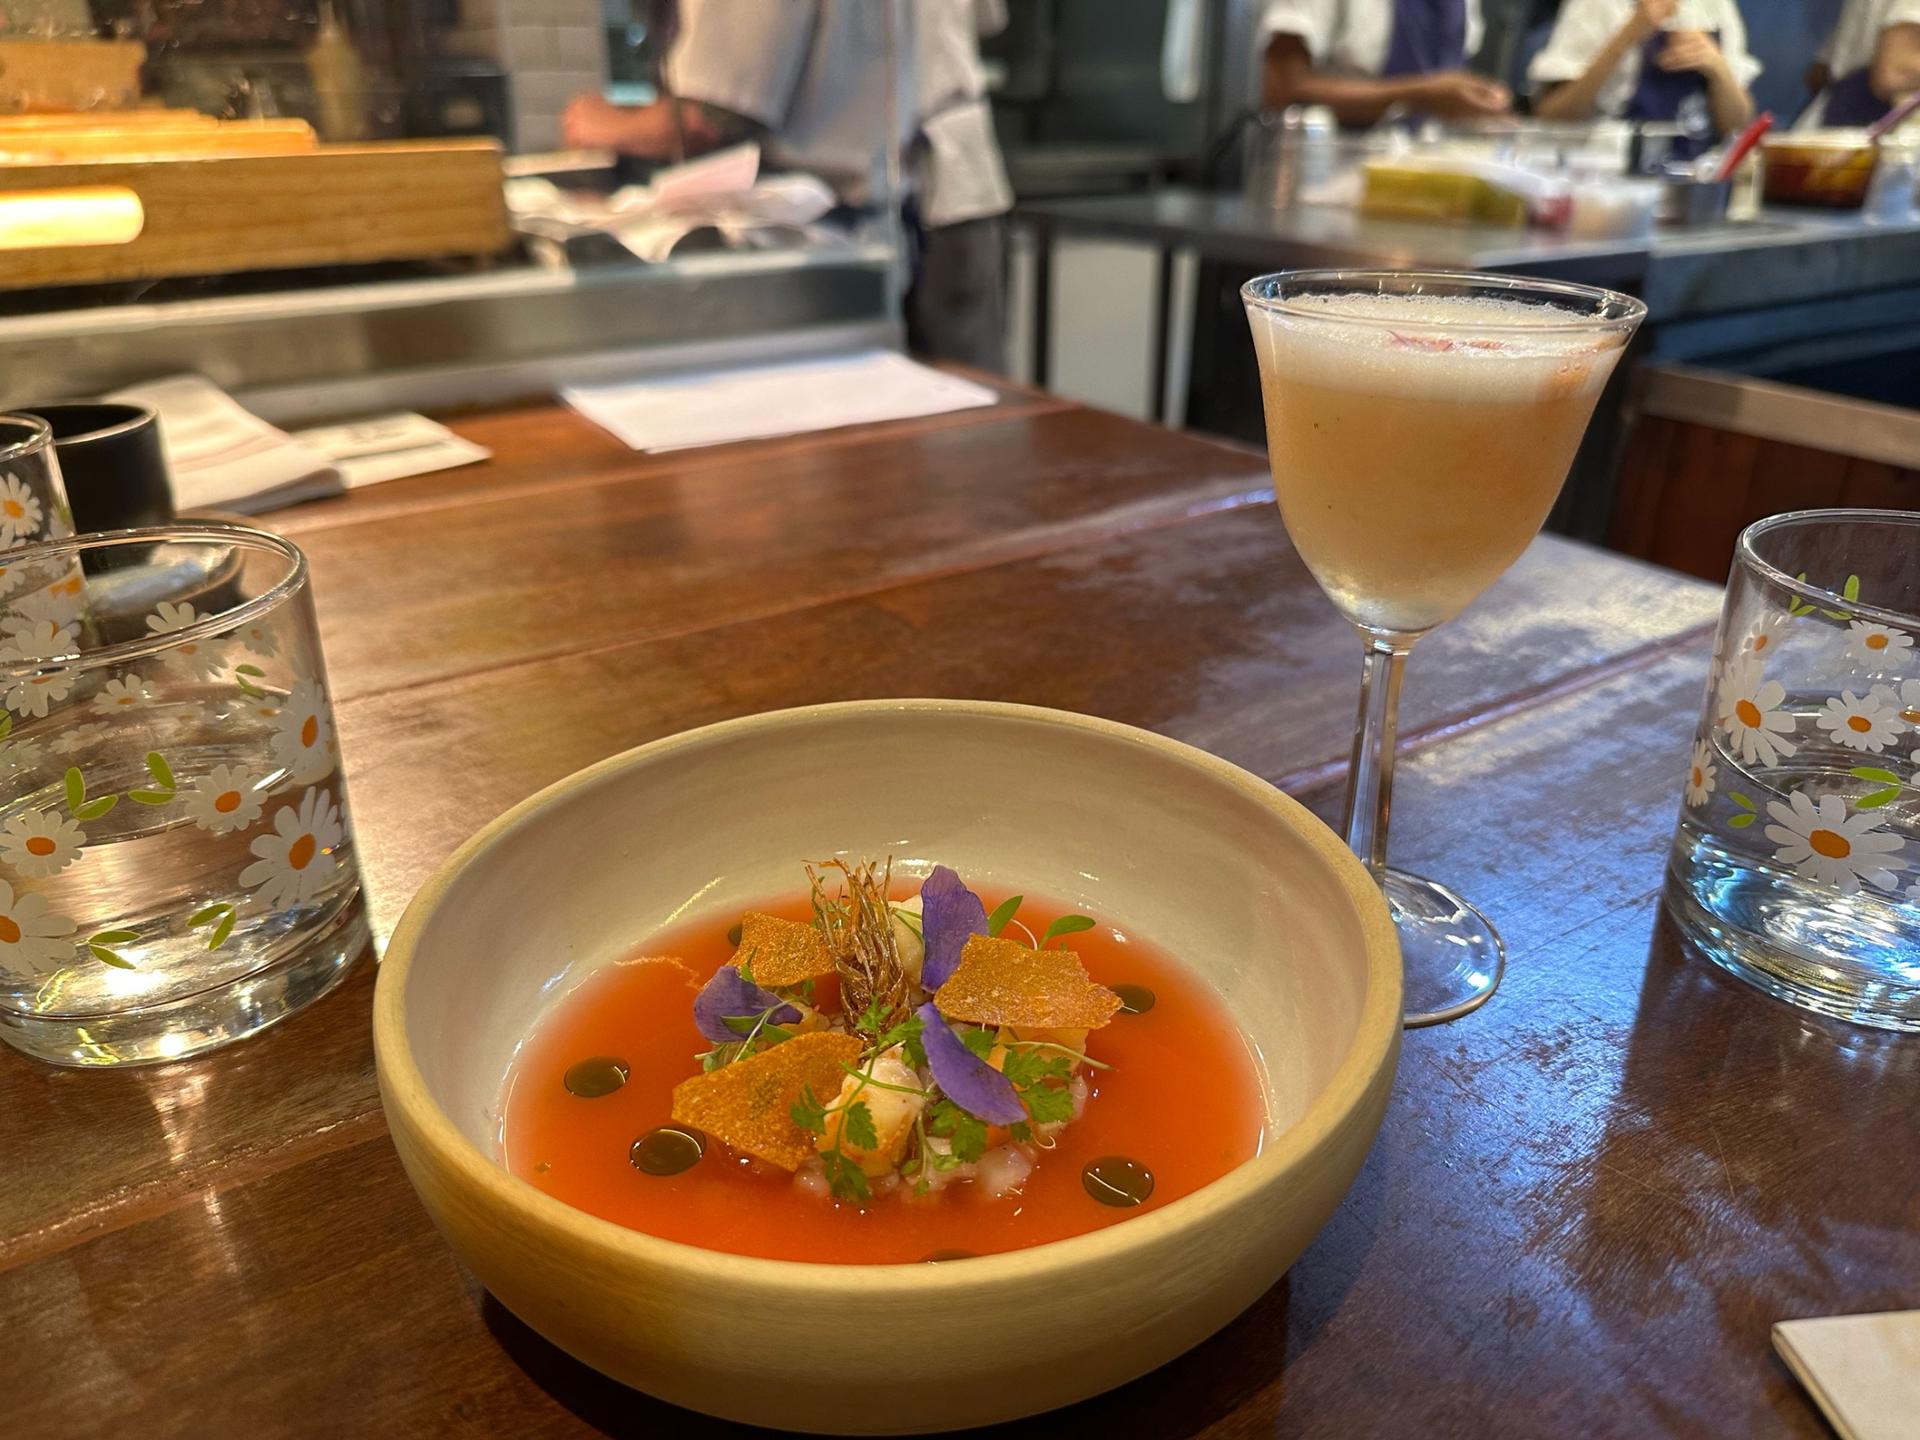 The ceviche of pork’s ear is served with raw shrimp, sweet potato and seasoned with lime juice. The pairing cocktail is pisco sour.